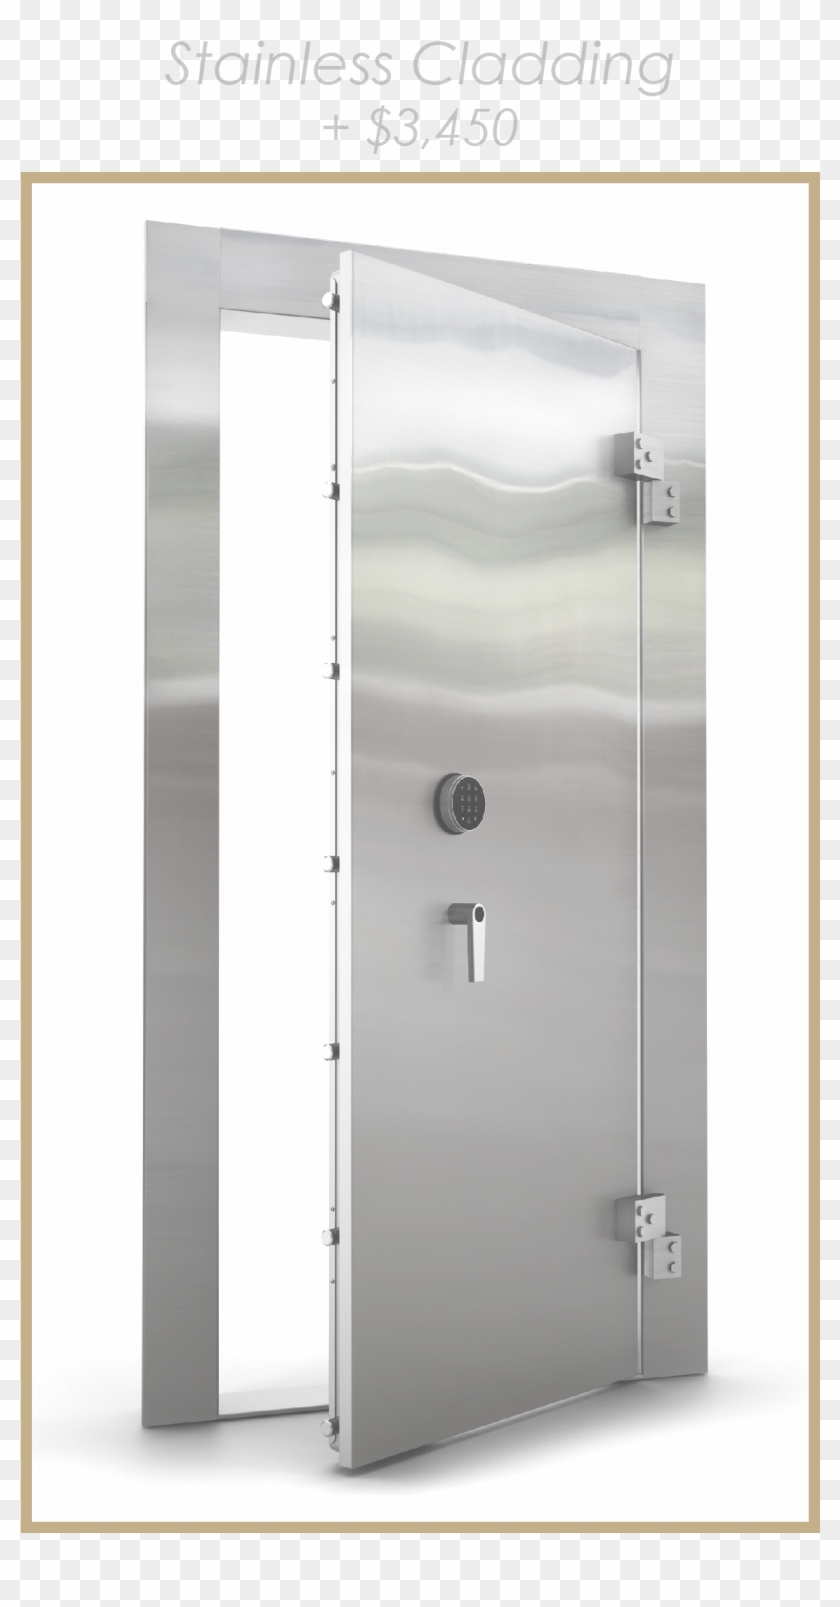 Stainless Cladding - Sliding Door Clipart